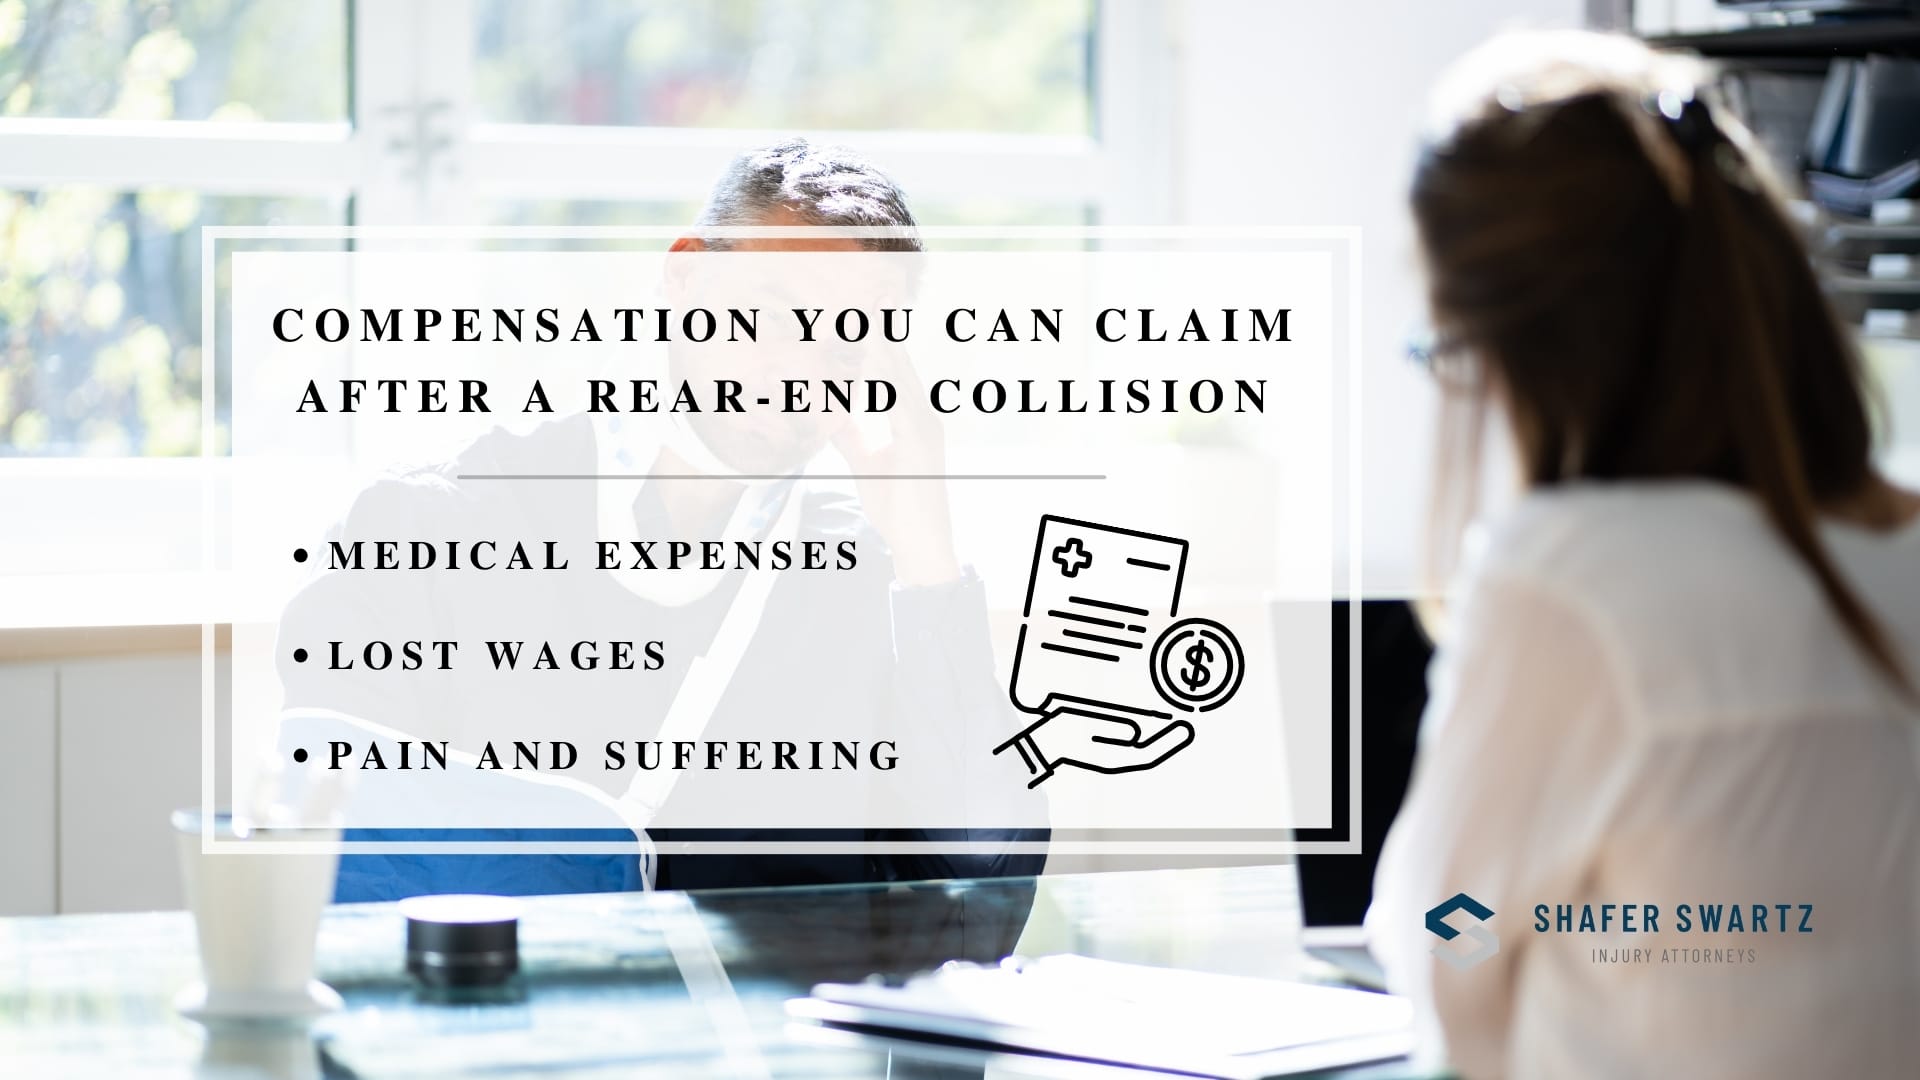 Infographic image of compensation you can claim after a rear-end collision